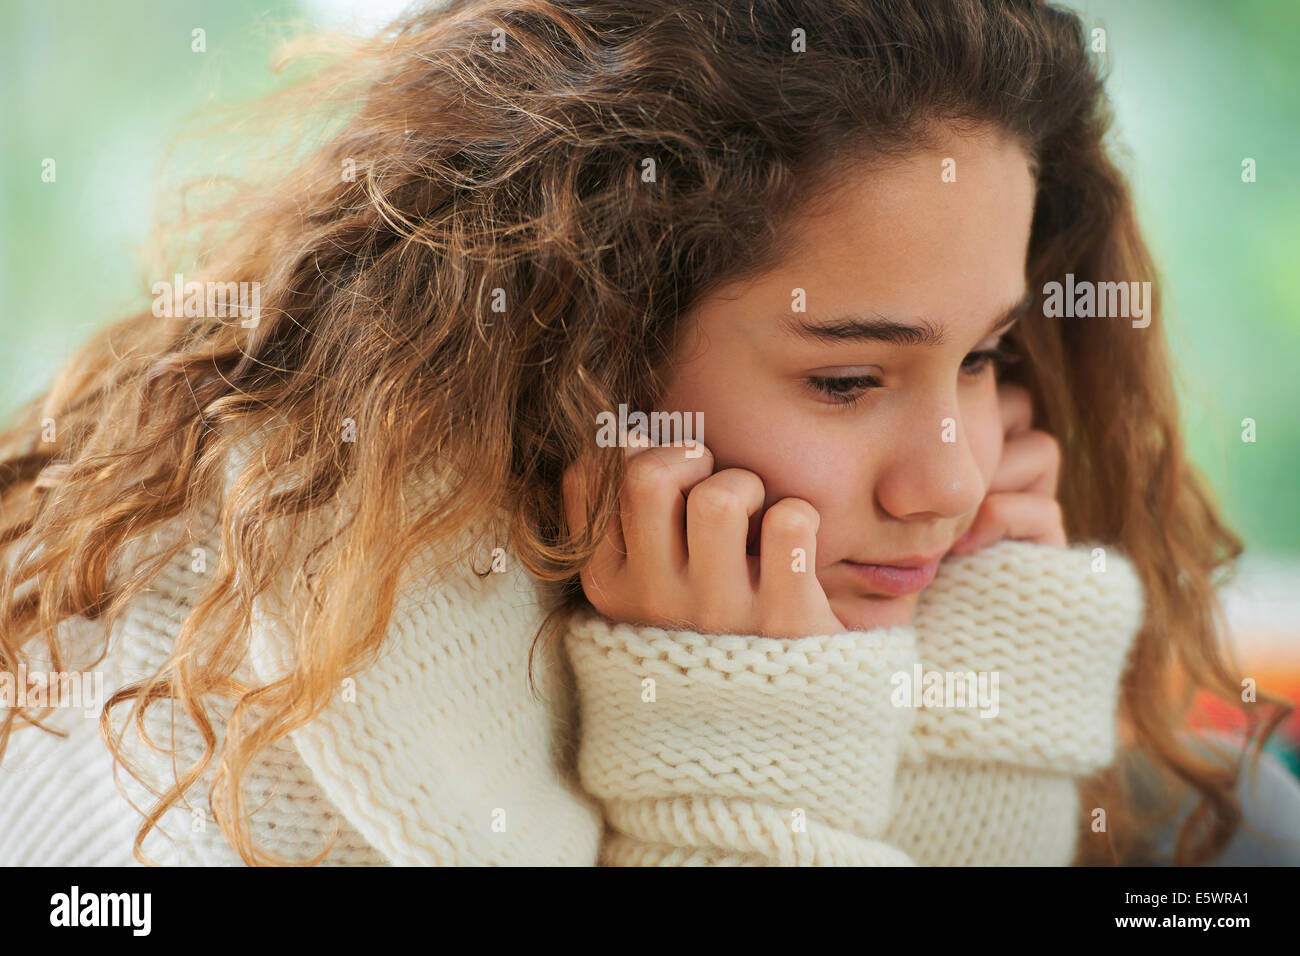 Young girl with brown hair, pensive expression Stock Photo